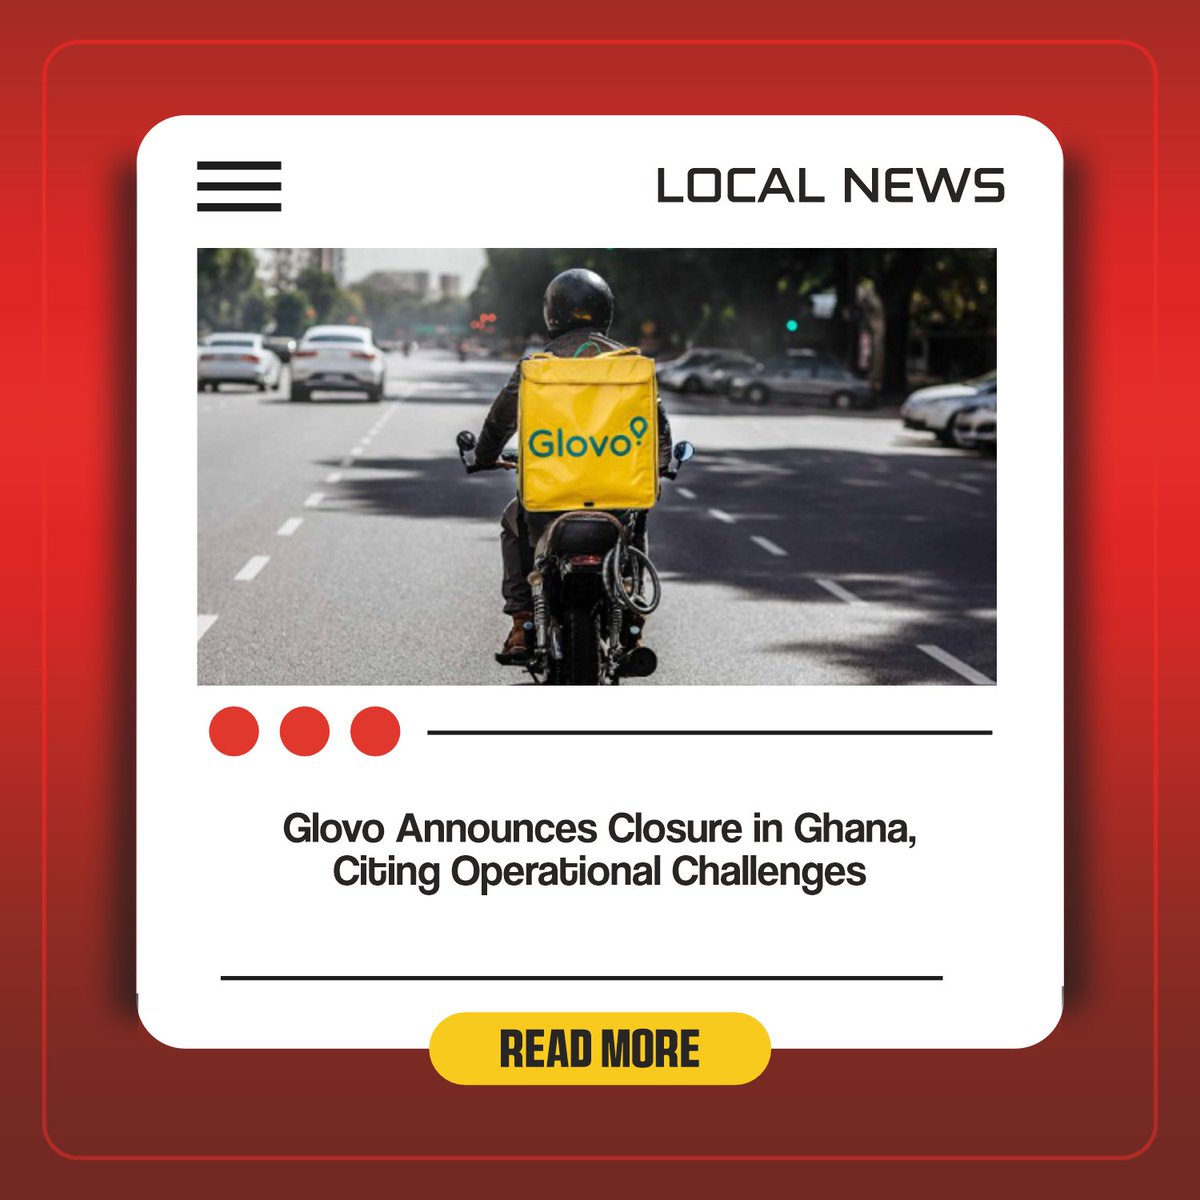 topknowledgemedia.com/glovo-ceases-o…
#GlovoClosure #GhanaBusiness #OperationalChallenges #BusinessNews #TechAfrica #StartupLife #DeliveryServices #LogisticsManagement #BusinessClosure #AfricanEconomy